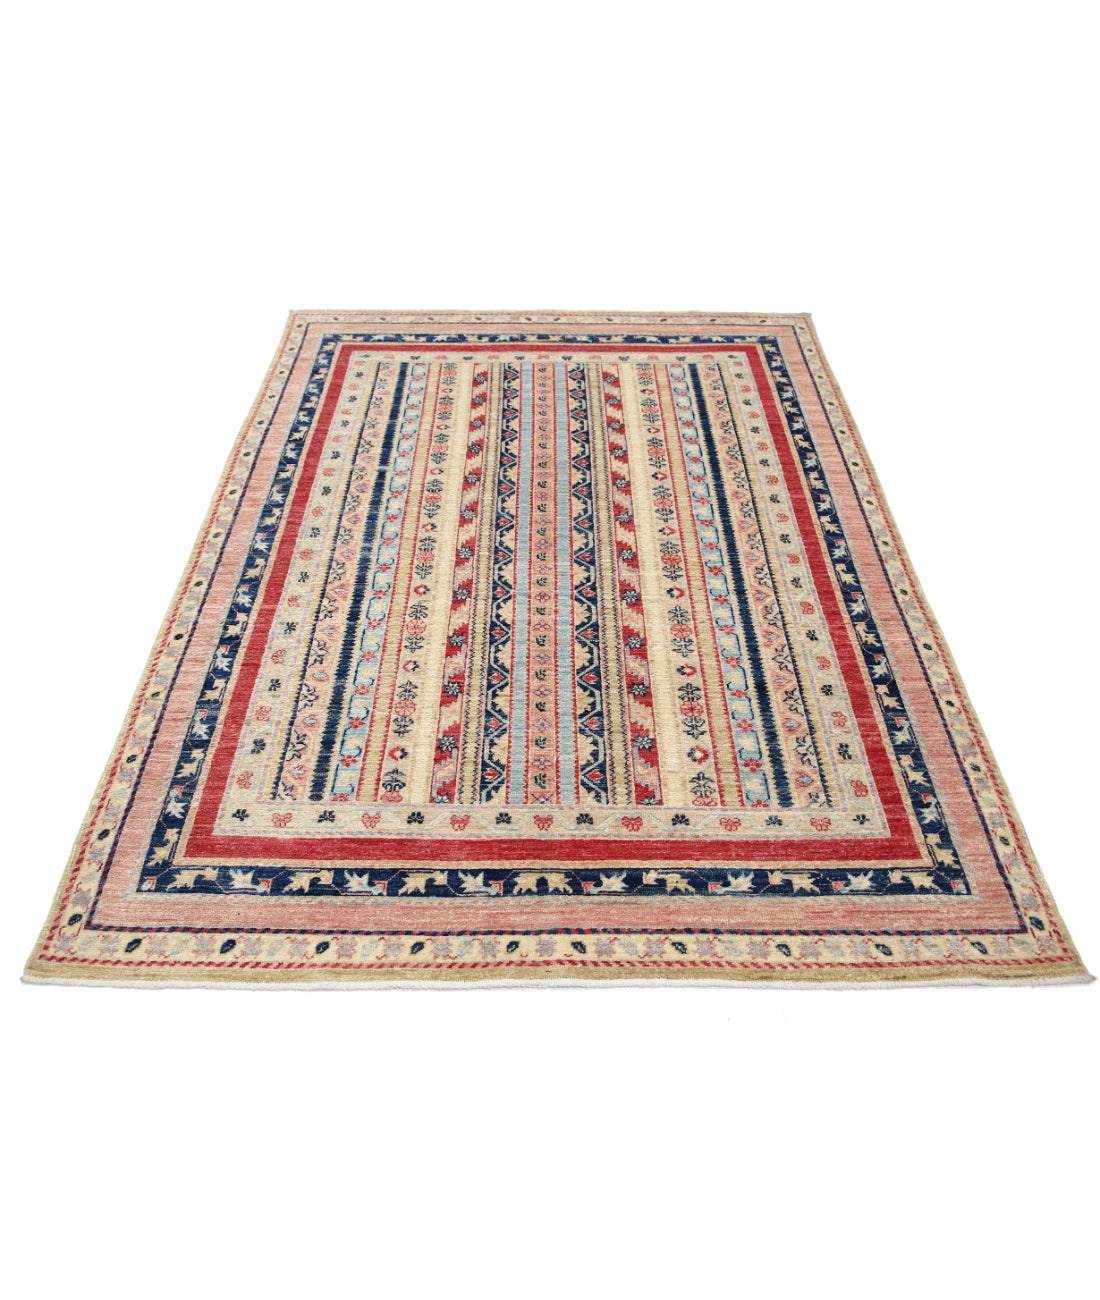 Hand Knotted Shaal Wool Rug - 4'10'' x 6'7'' 4'10'' x 6'7'' (145 X 198) / Multi / Multi